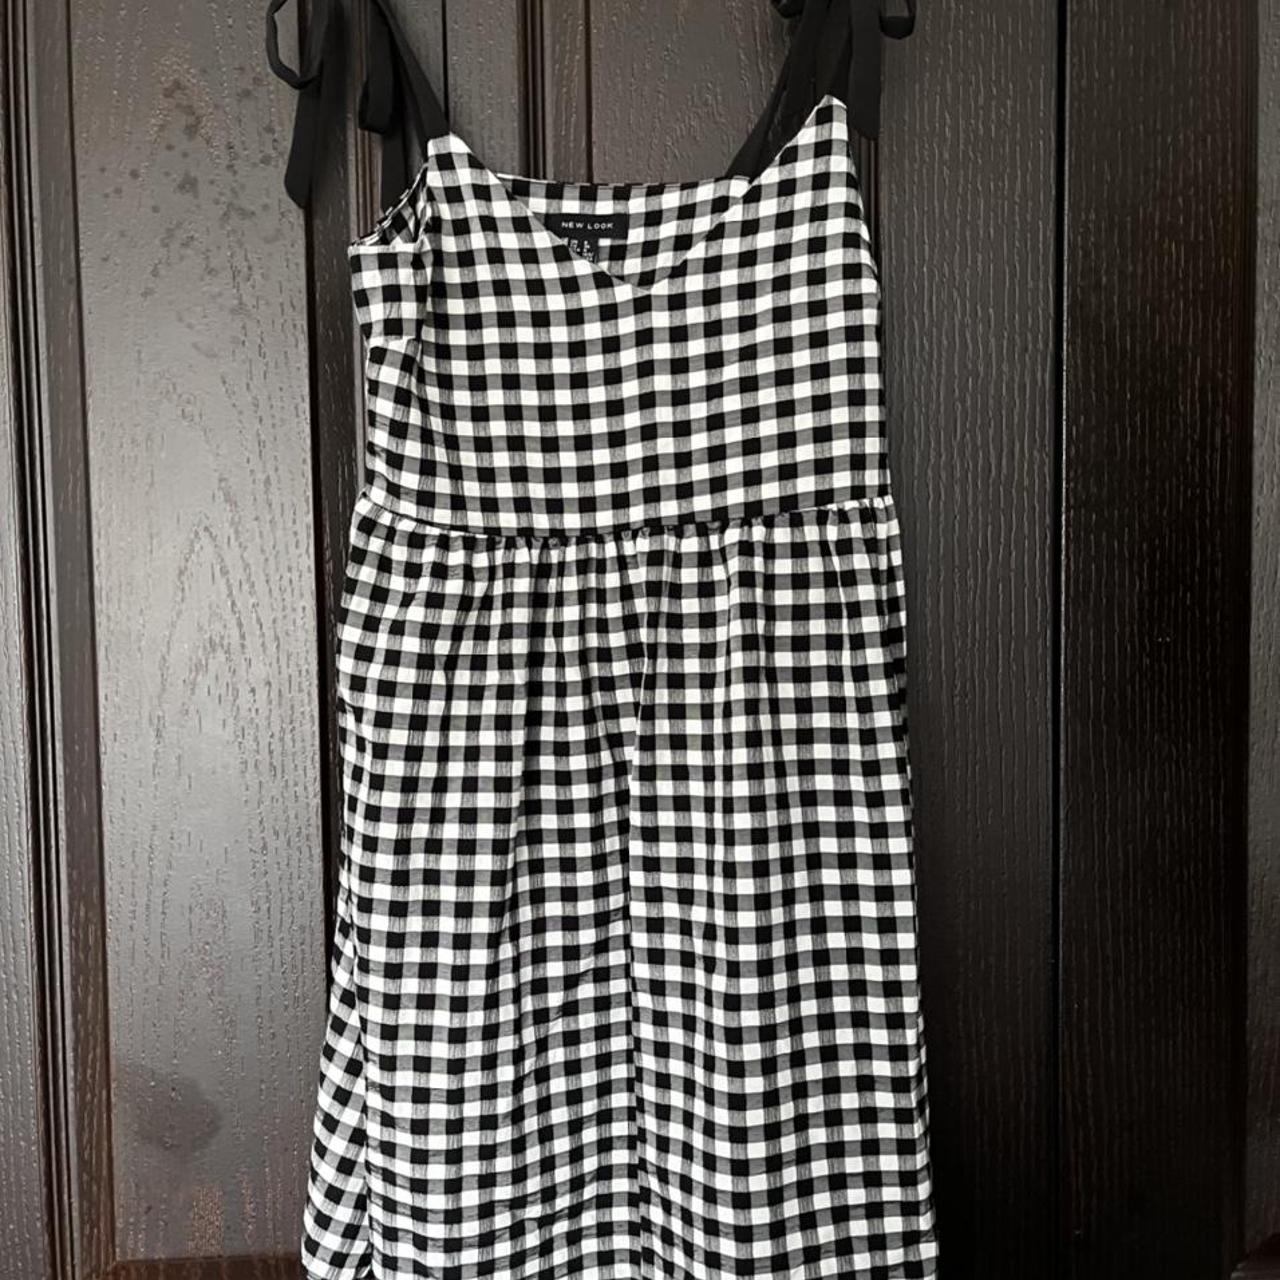 New look gingham smock style dress size 8 with... - Depop